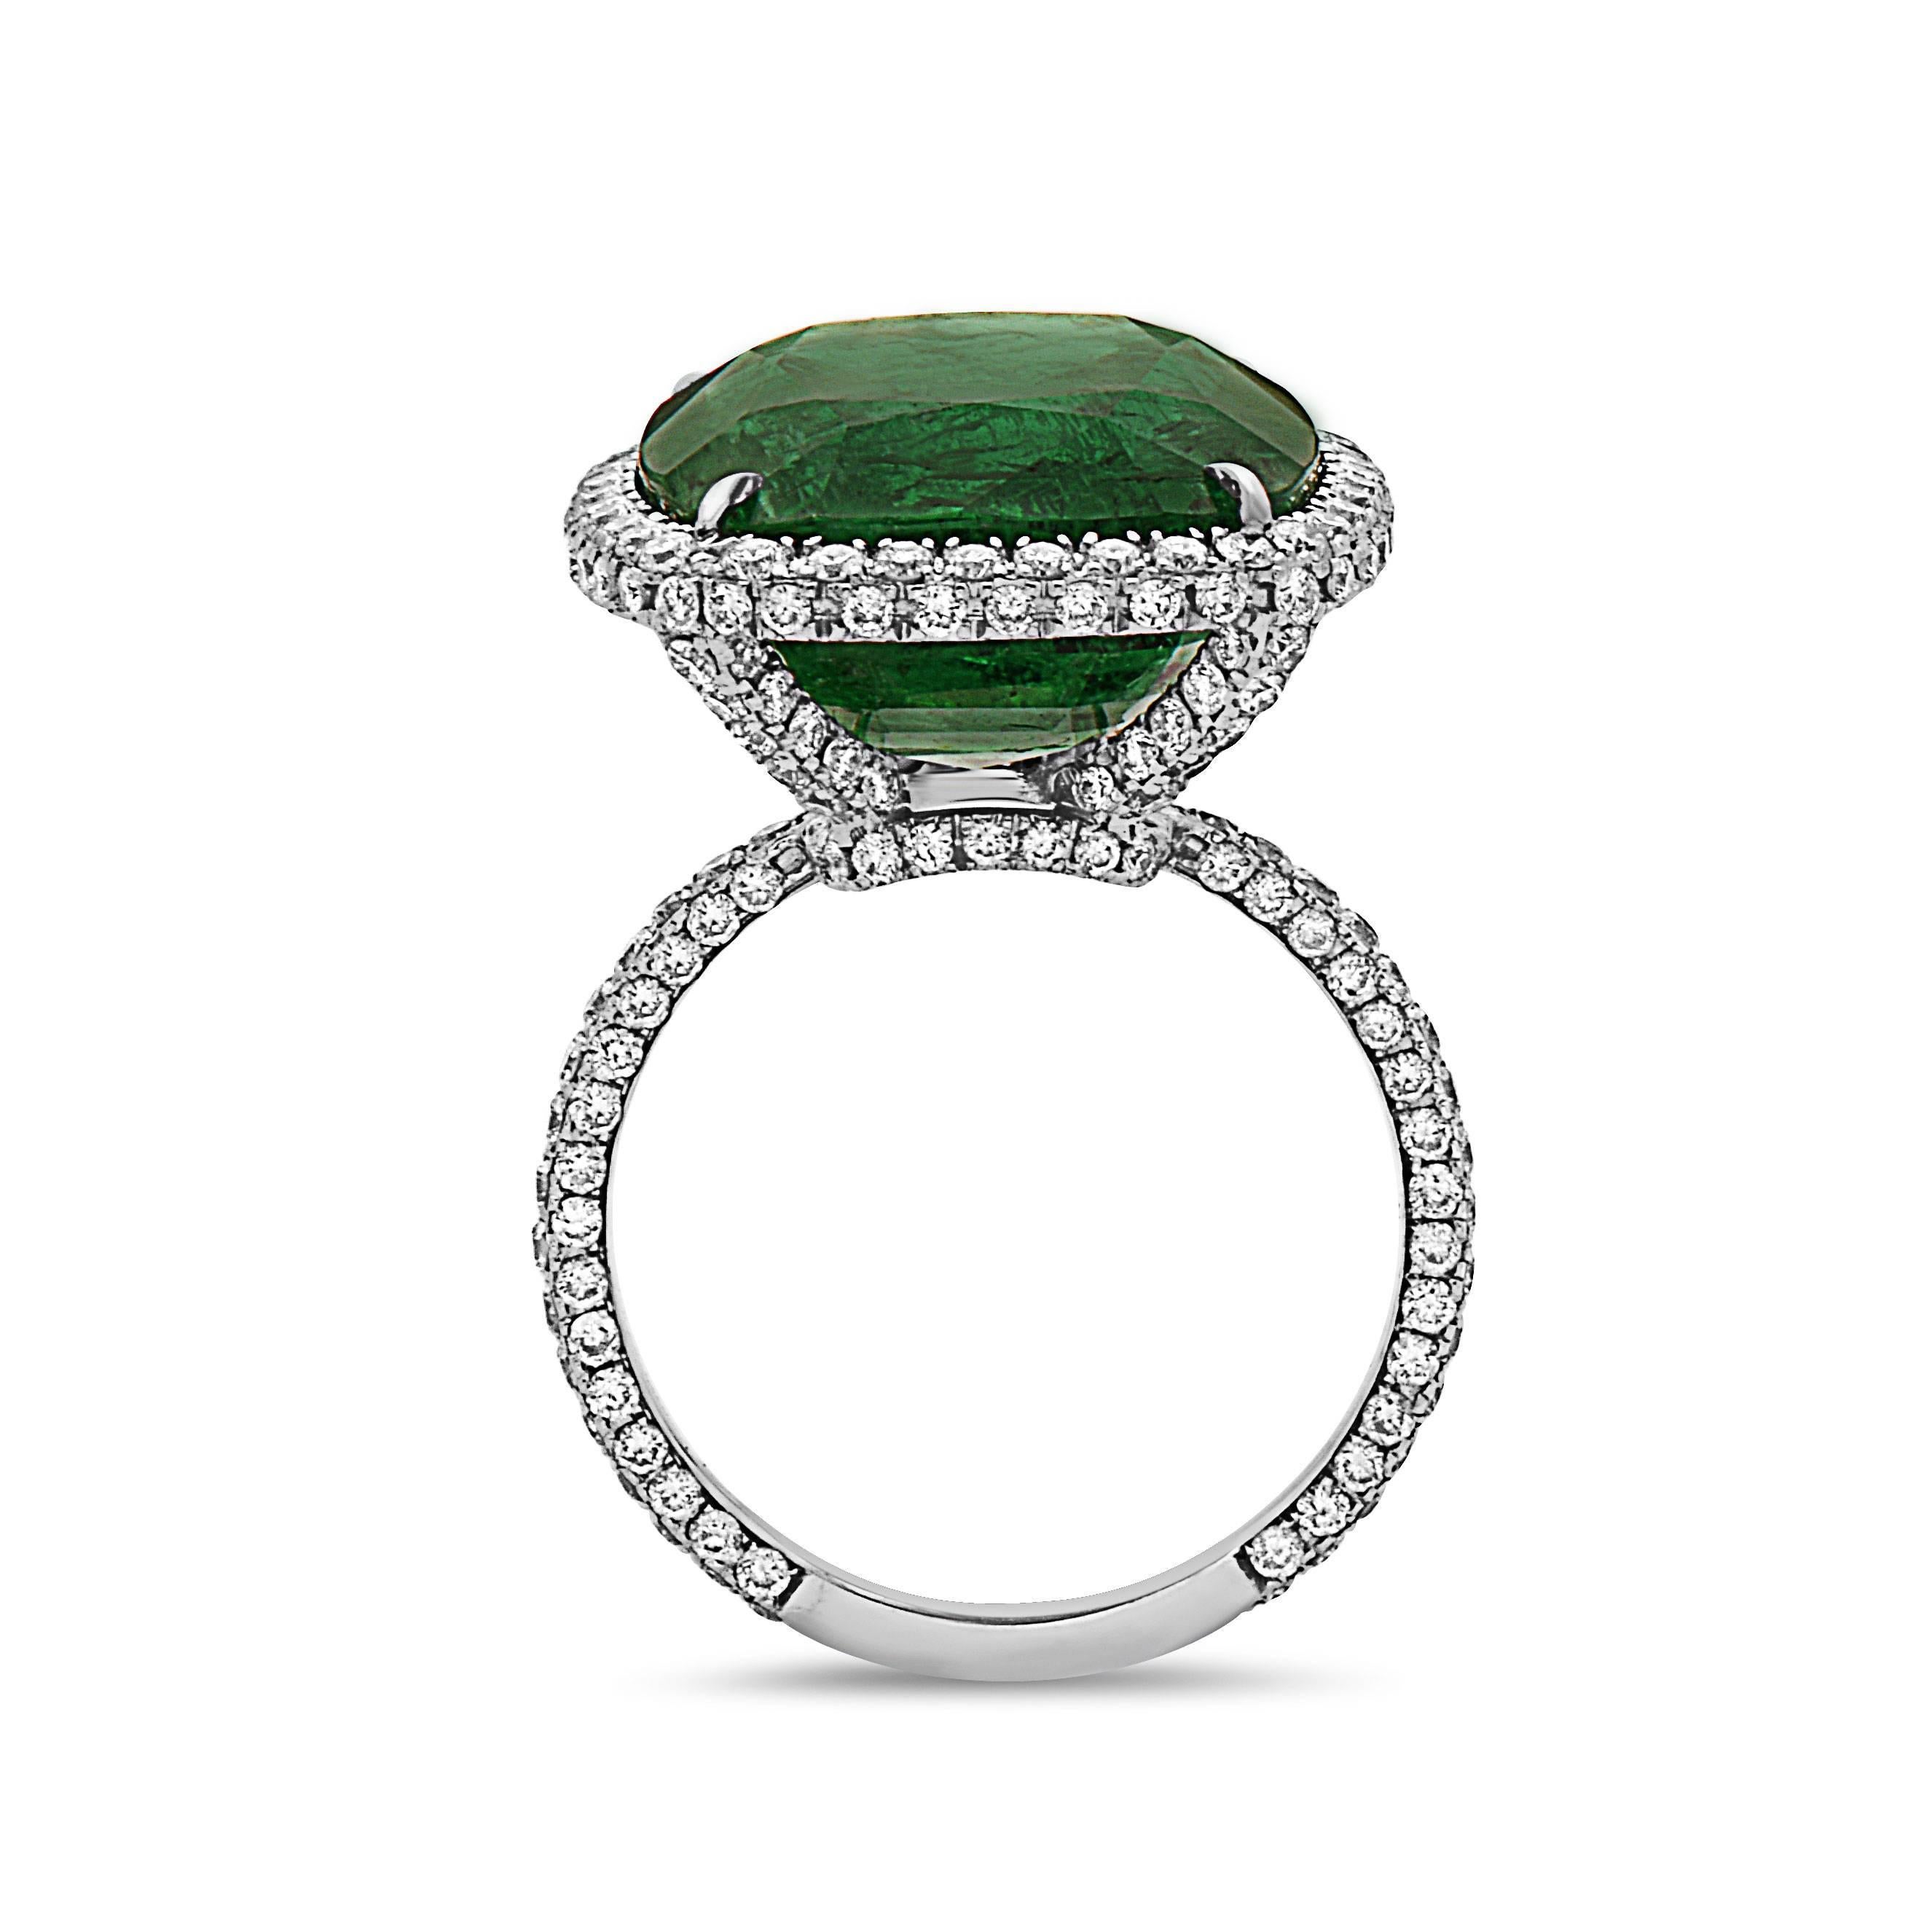 Approx total weight: 17.00 Carats
Center Cushion Emerald: Deep rich Green Color absolute gem. This is the ideal emerald. 
Diamond Color: E-F
Diamond Clarity: Vvs 
Cut: Excellent 
As noted we are vetted and rated a Top Seller on 1stdibs falling into